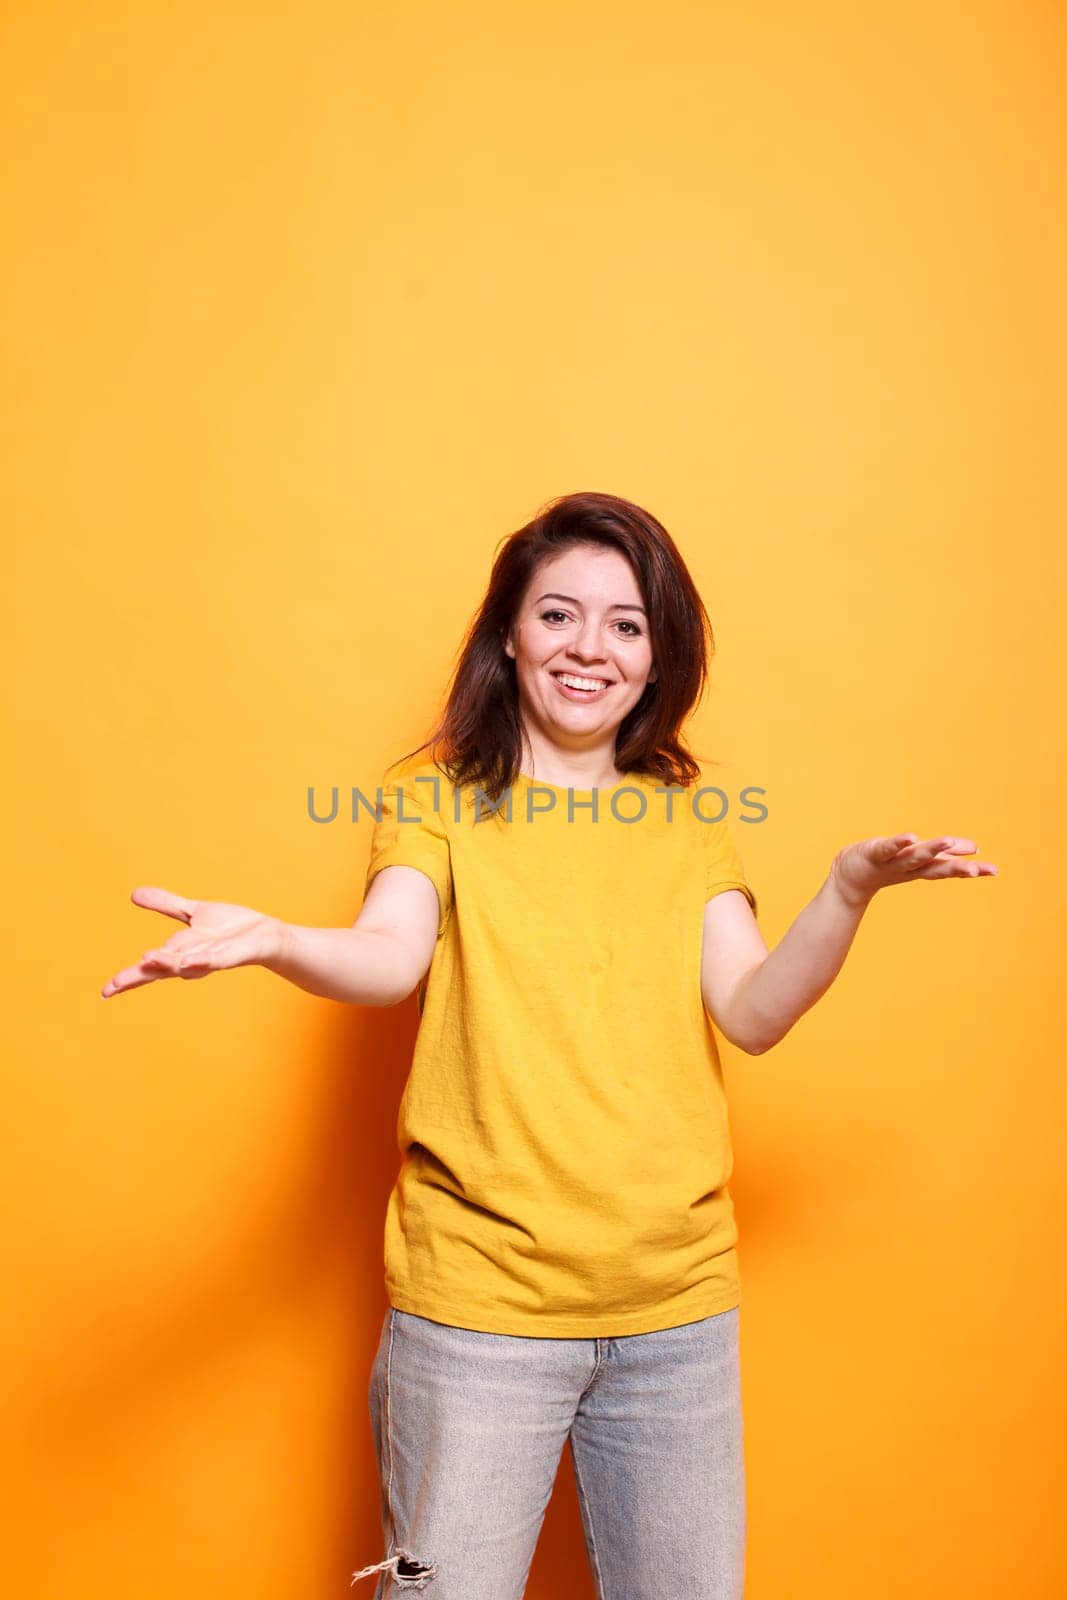 Joyful young woman with expressive positive attitude welcoming with raised arms in studio. Portrait of brunette lady smiling, being friendly and sociable, doing a greeting gesture.